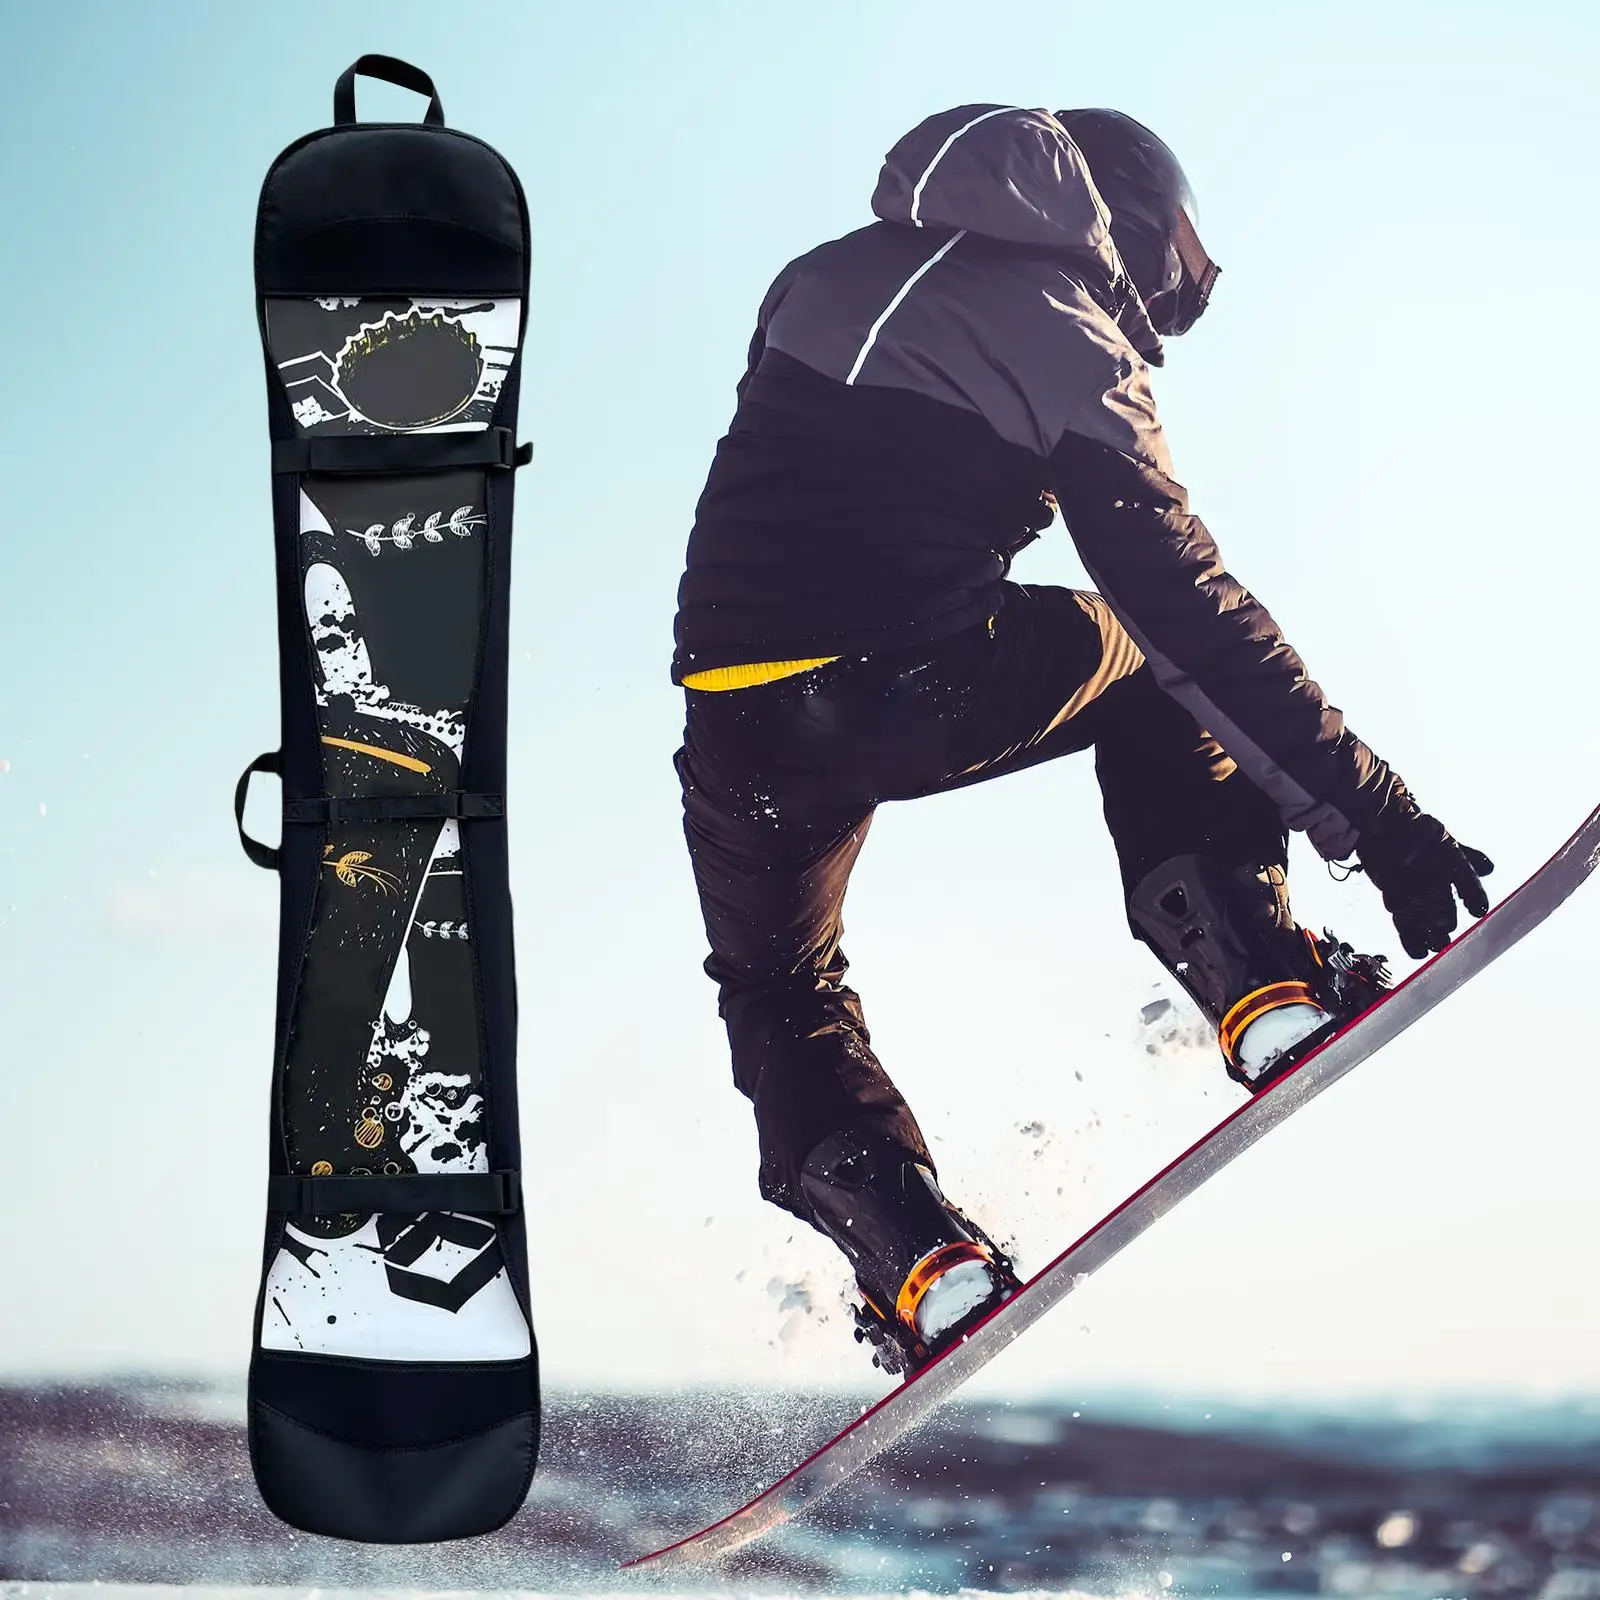 163cm Snowboard Bag with Padded Adjustable Portable Accessories Protector High Elasticity Carry Case Cover for Traveling Outdoor